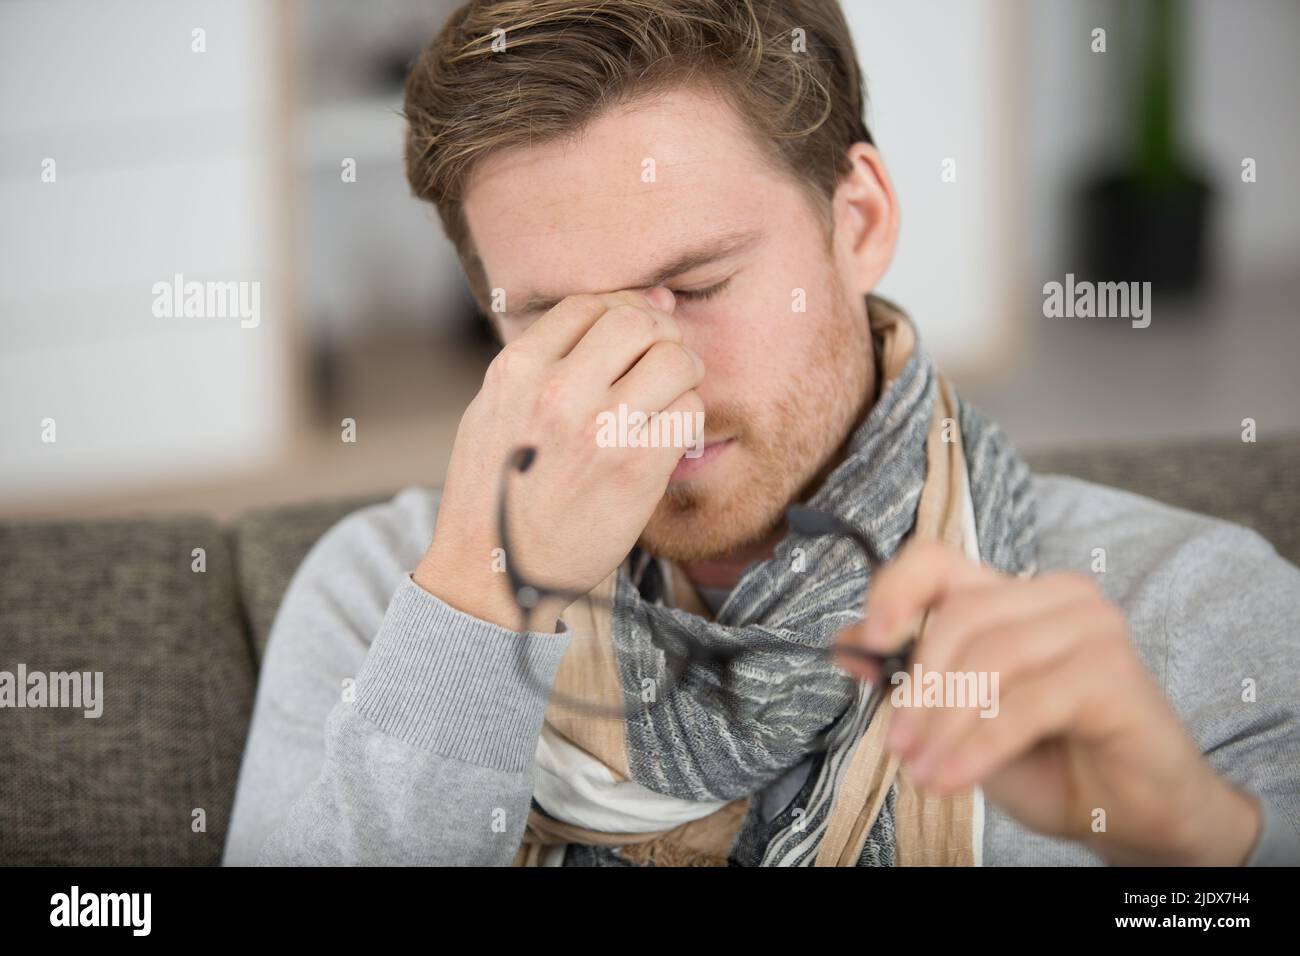 young man rubbing eye on white background annoying itch Stock Photo